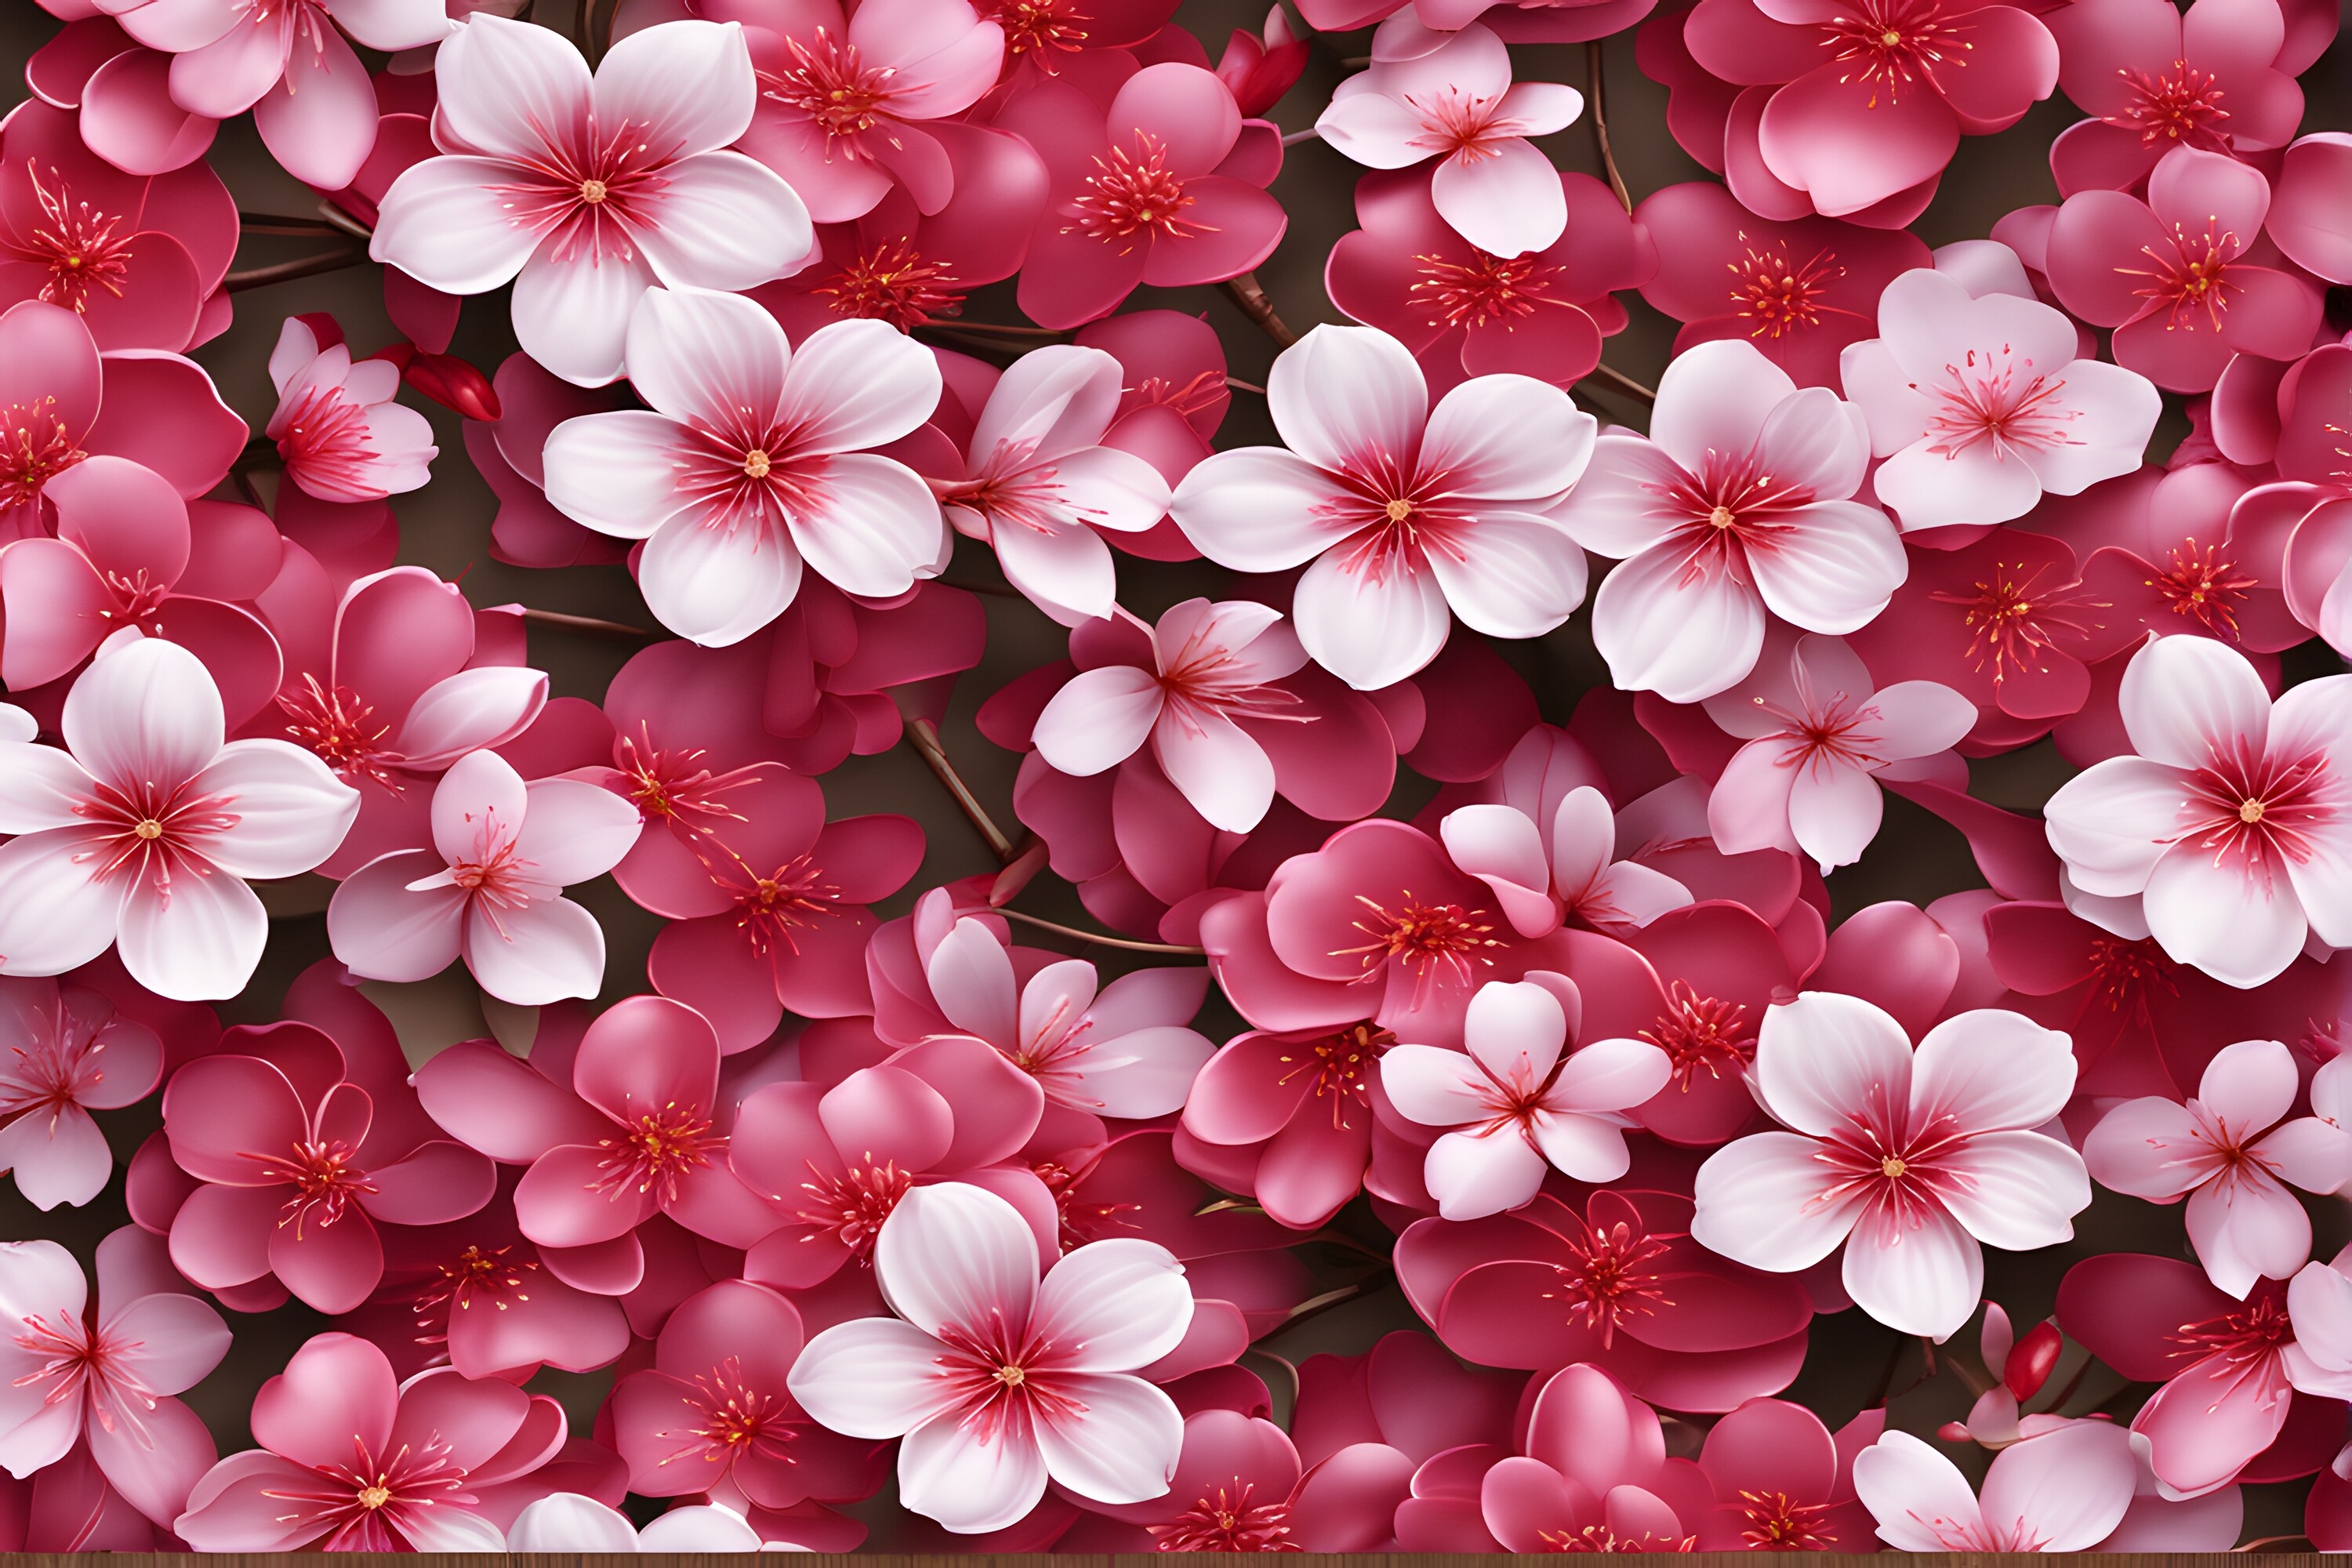 Japanese Cherry Blossom Flower Wallpaper Graphic by Forhadx5 · Creative ...